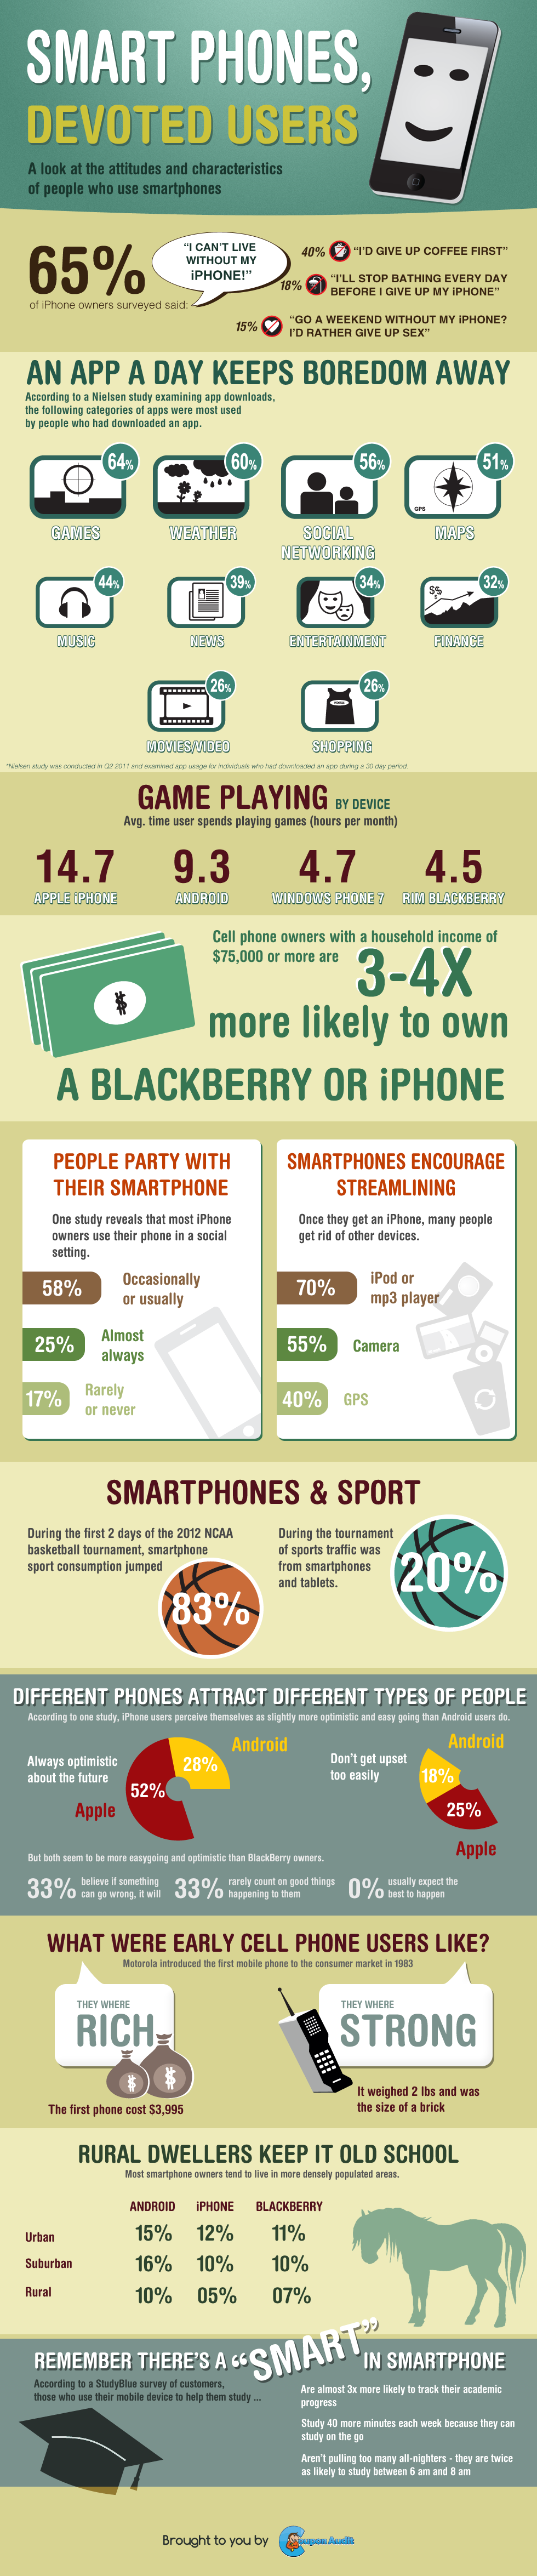 A Look at the Characteristics of Smartphone Users [Infographic]